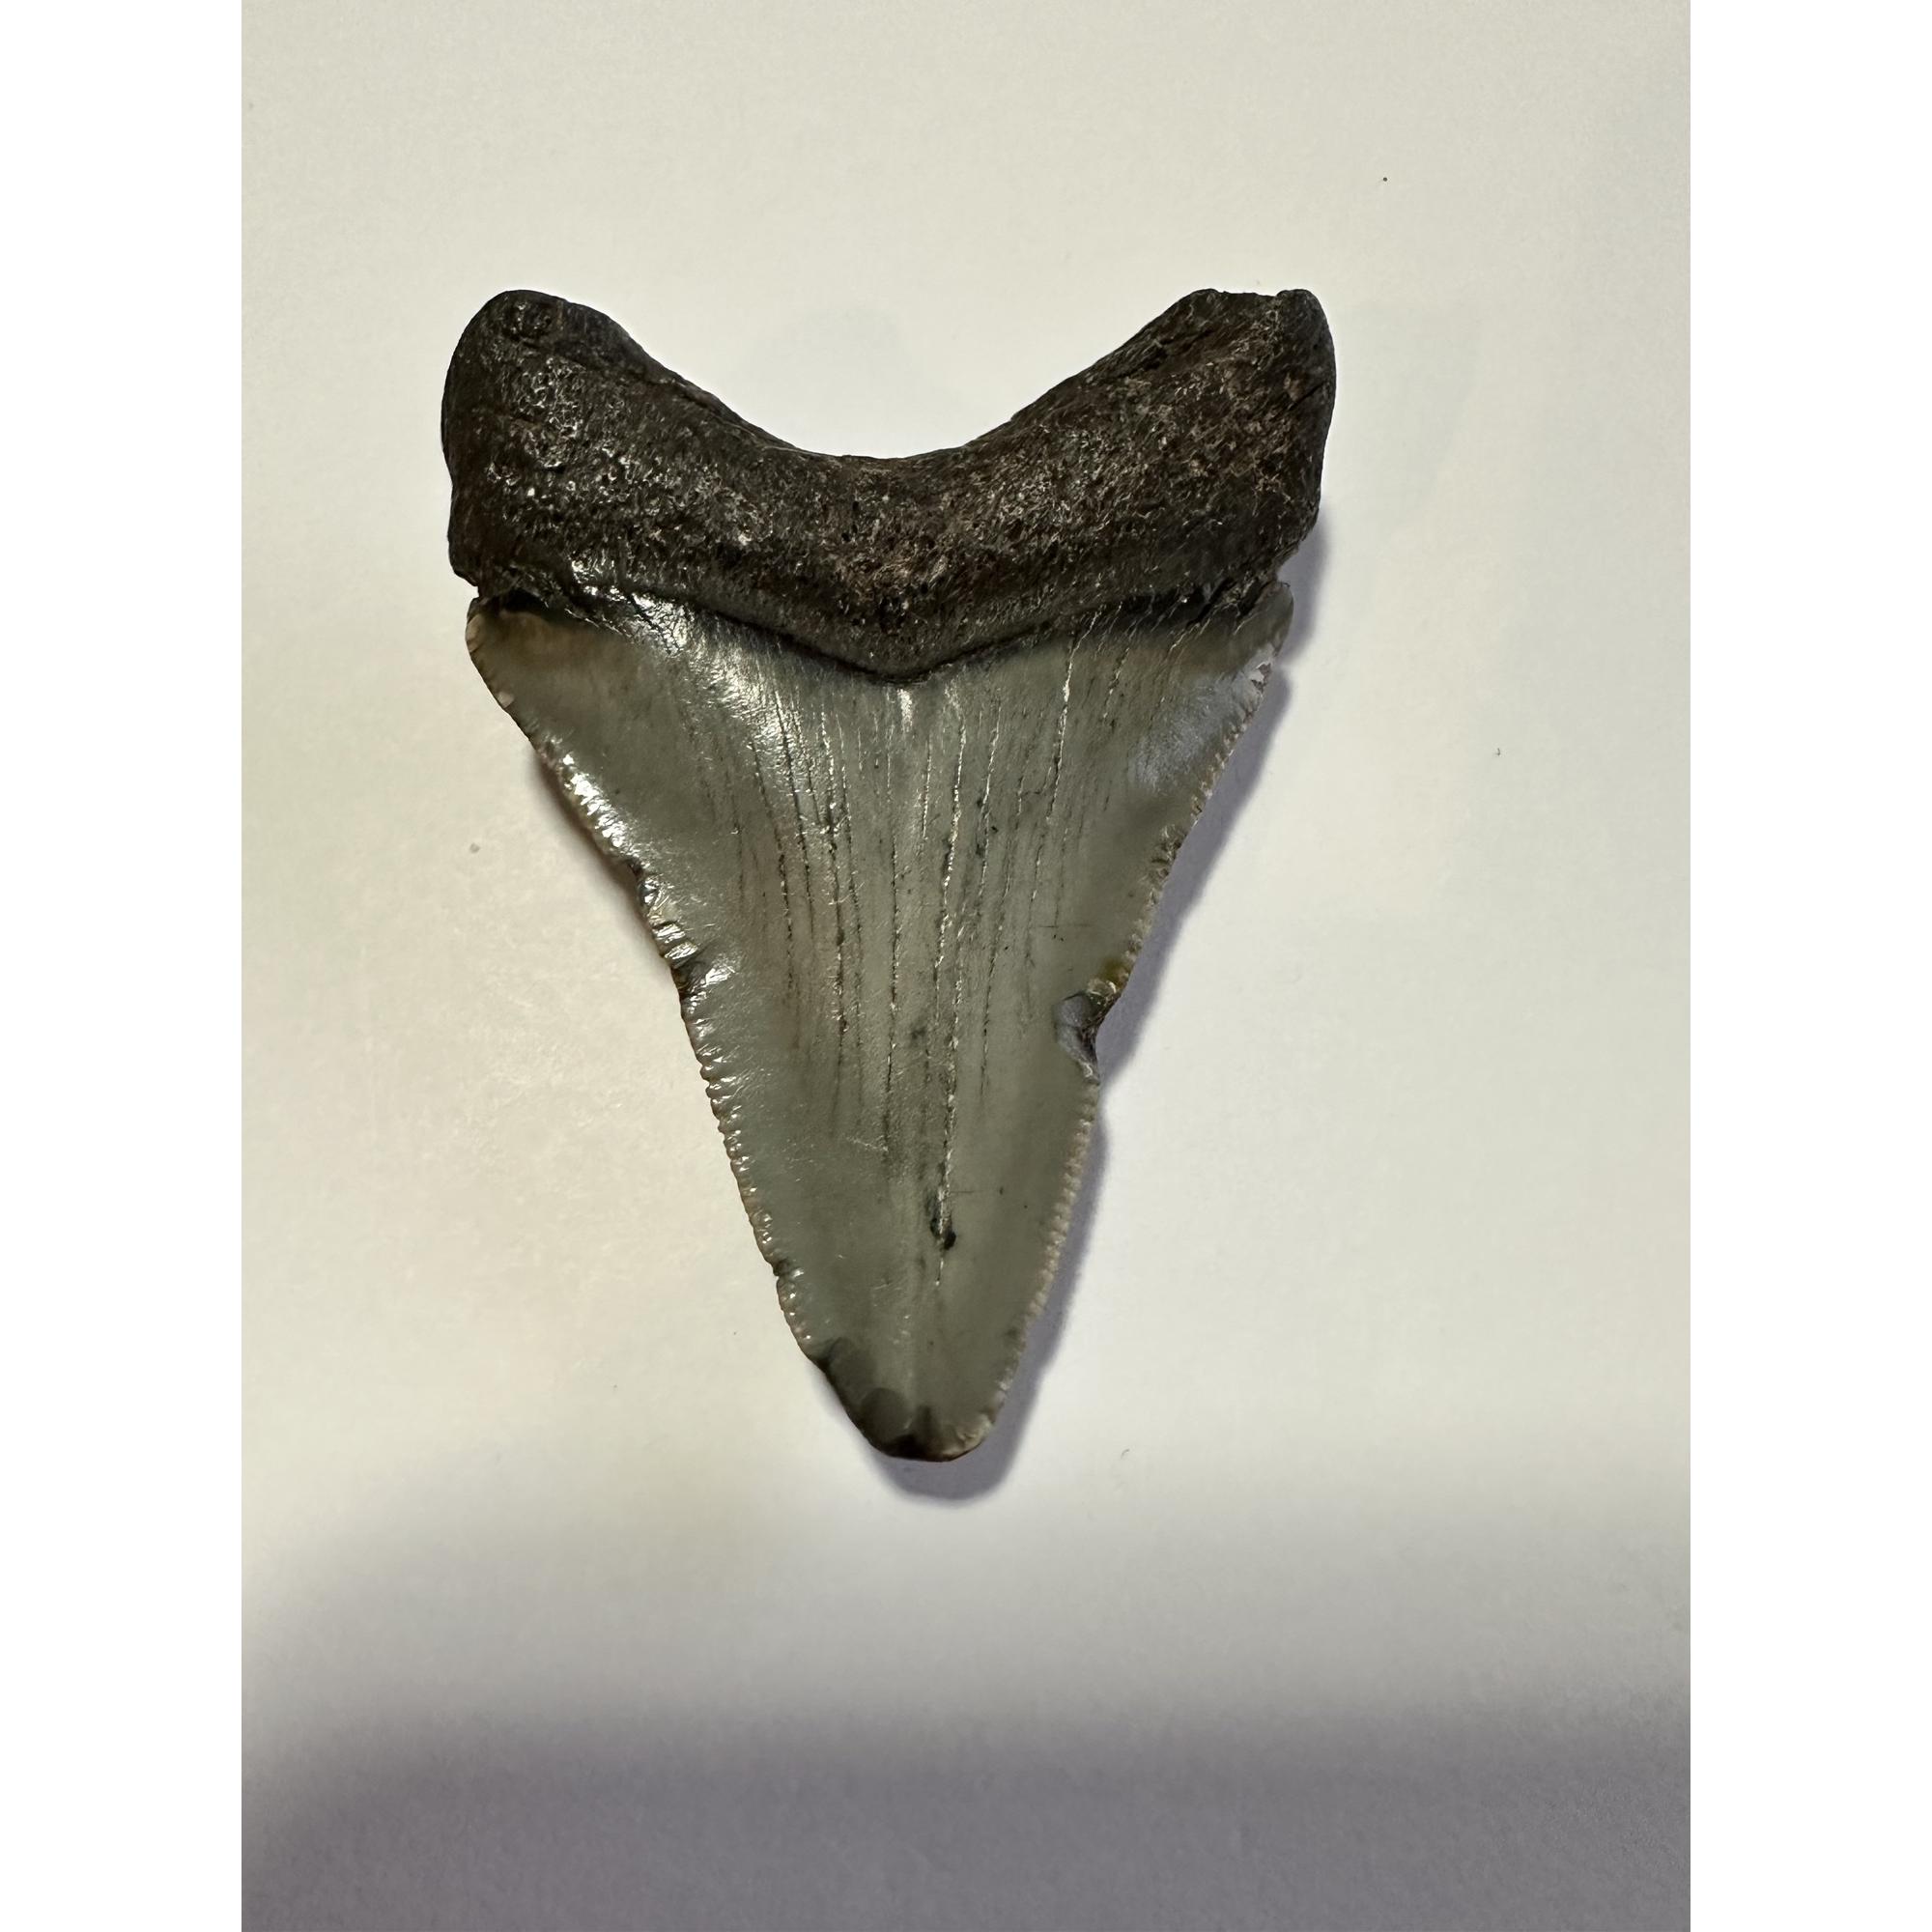 Megalodon fossil shark tooth, measuring 2.75 inches